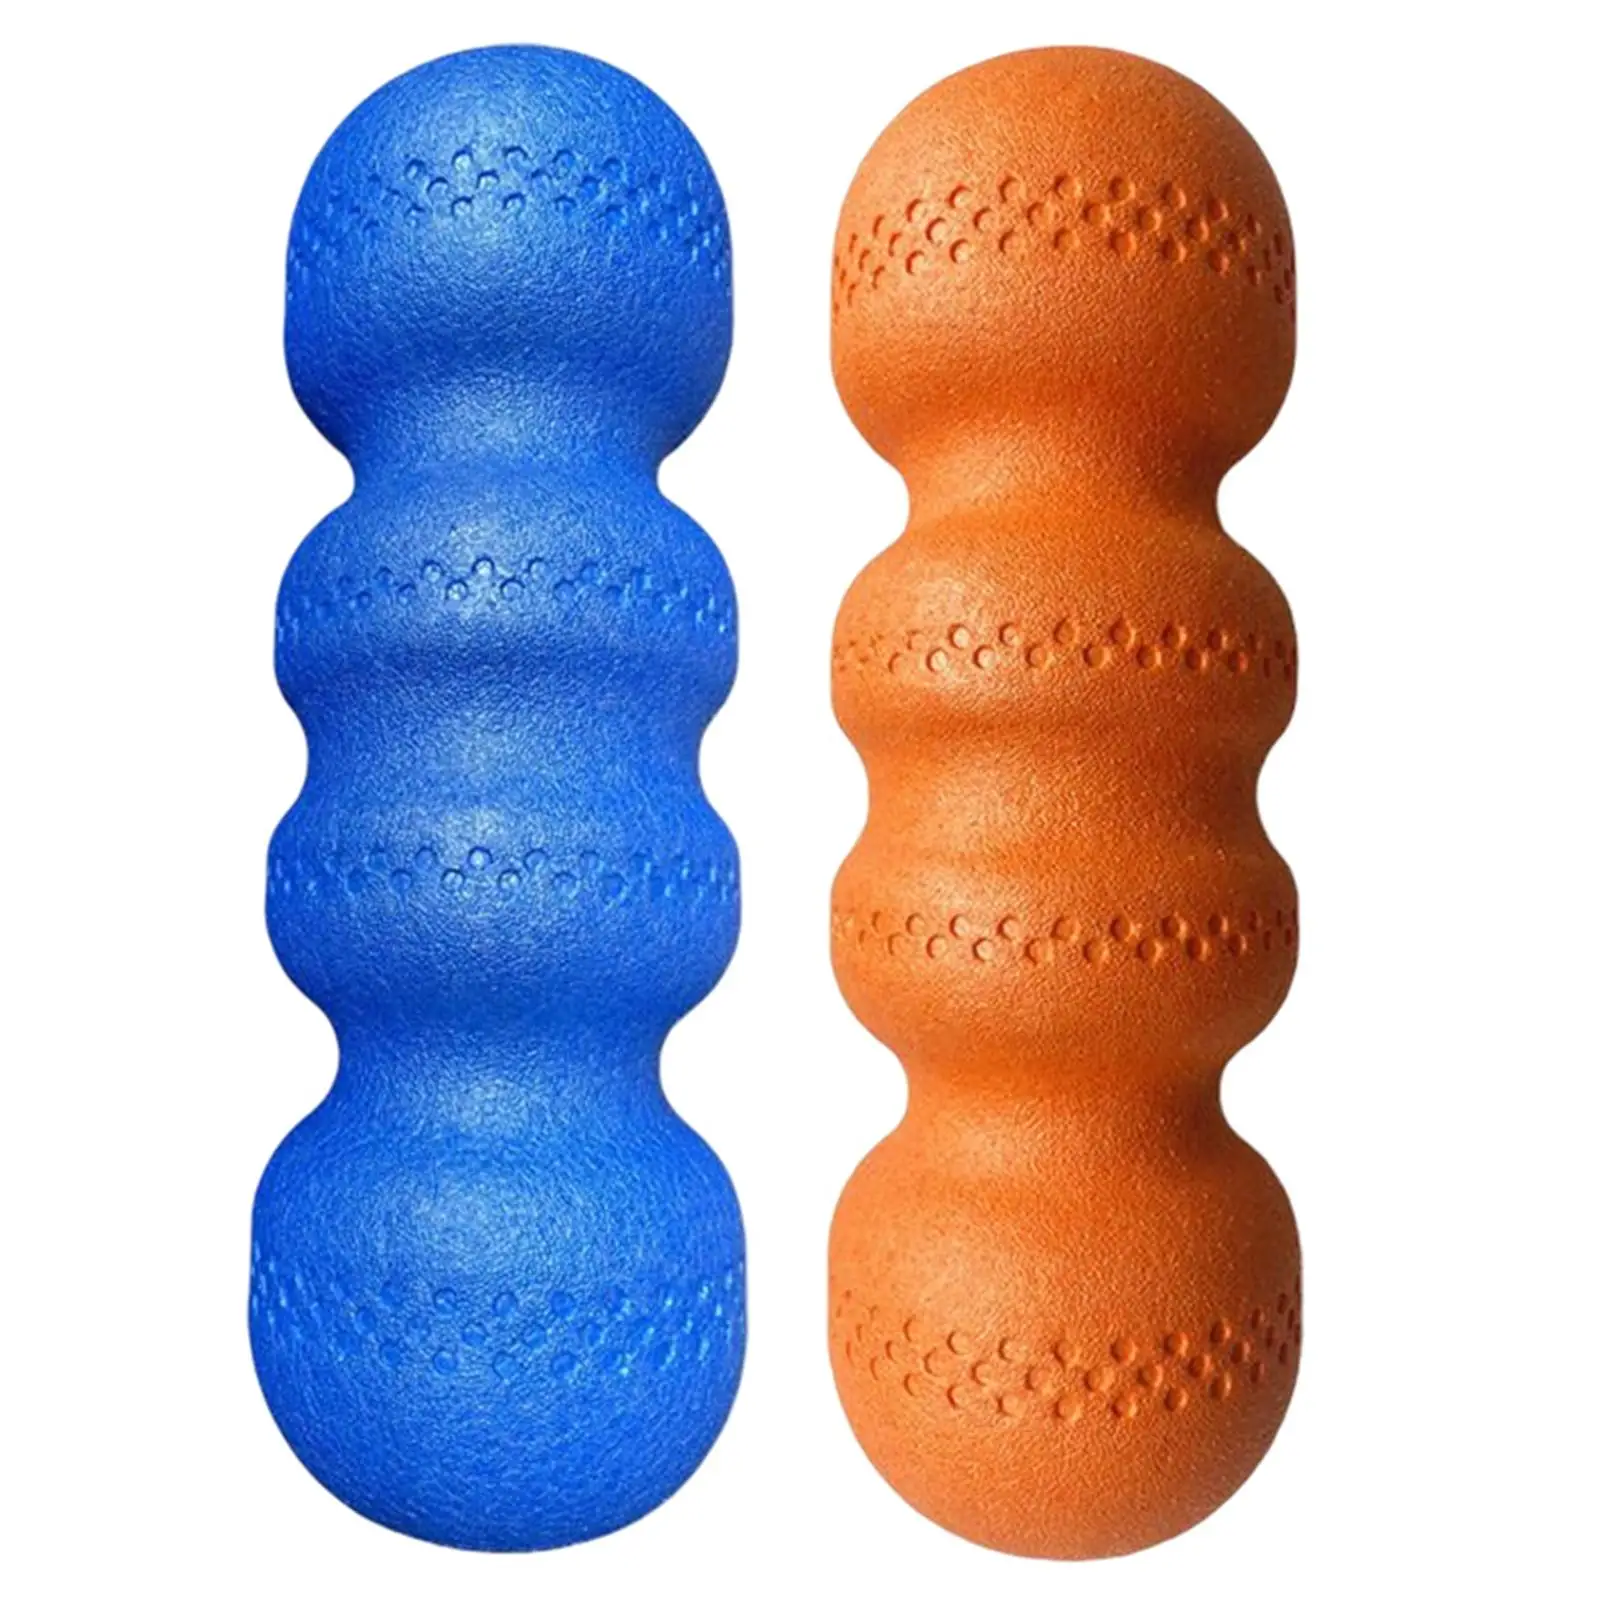 Relief Massage Exercise Fitness Tissue Tool back Massage Peanut Ball